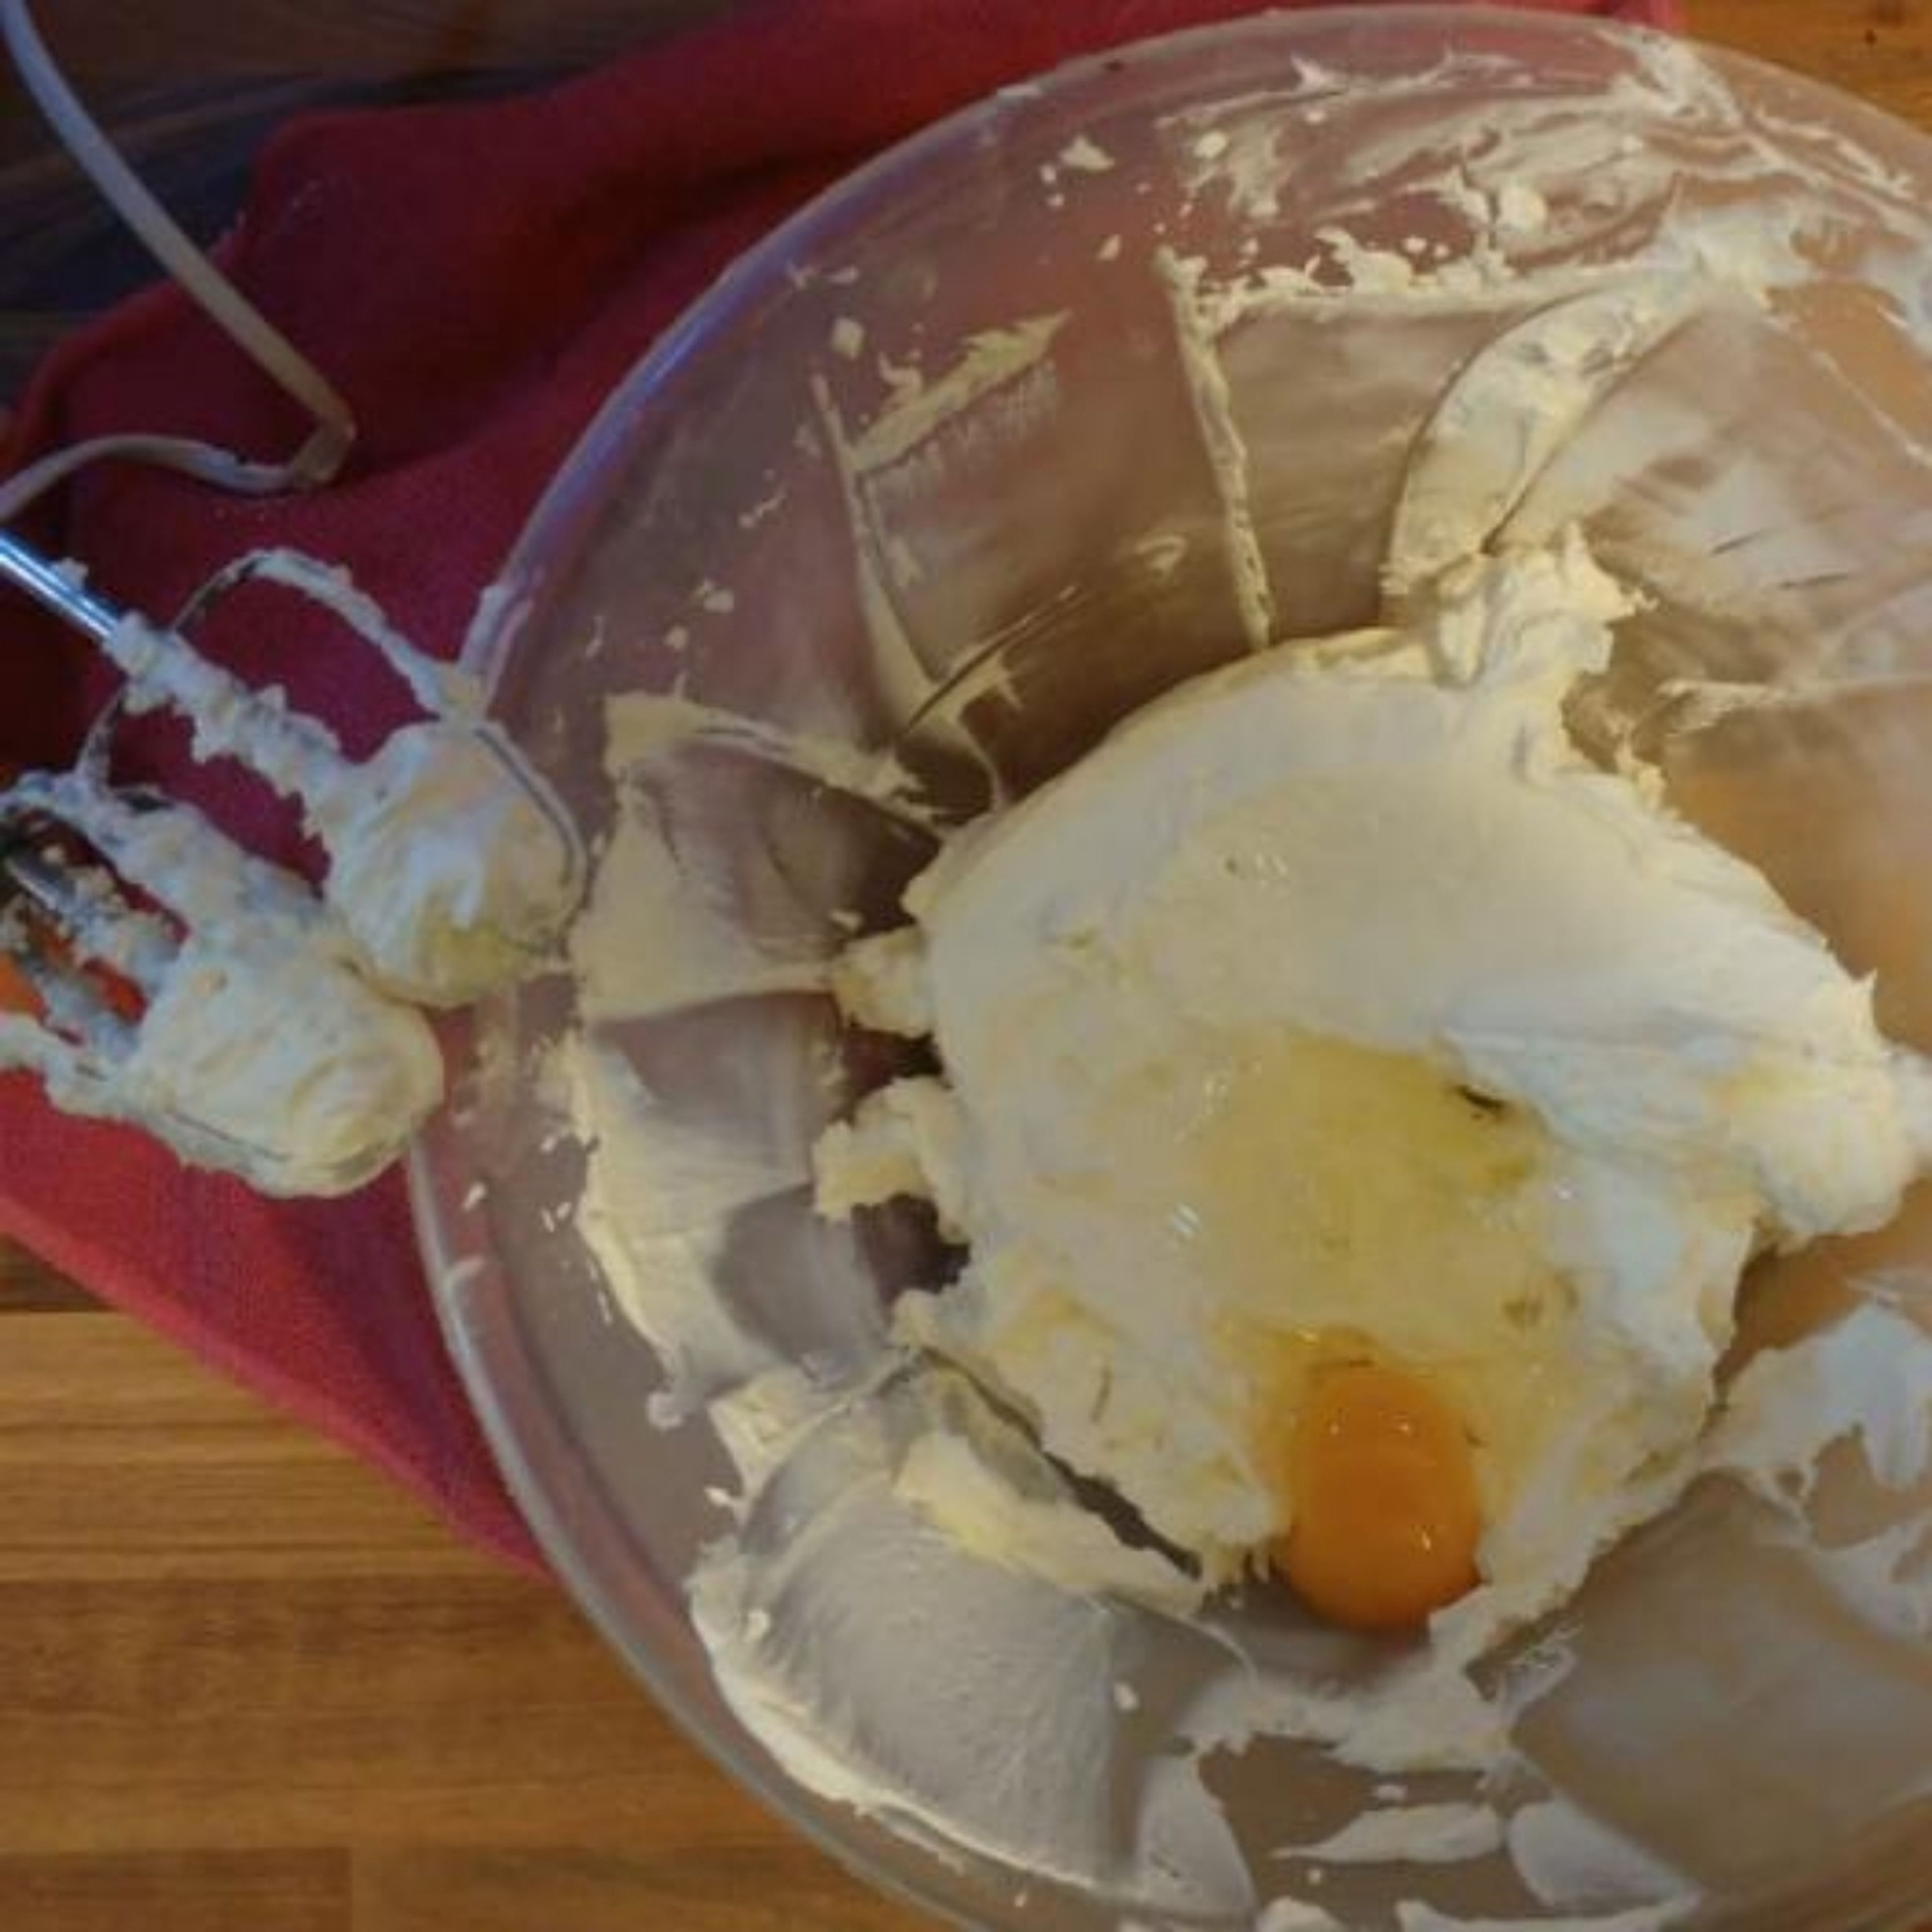 Using and electric whisk, whisk the ricotta and mascarpone together for 3 minutes. Add the eggs, one by one, adding the next egg after the previous has been fully incorporated. After you have added all the eggs, whisk for 5 minutes.